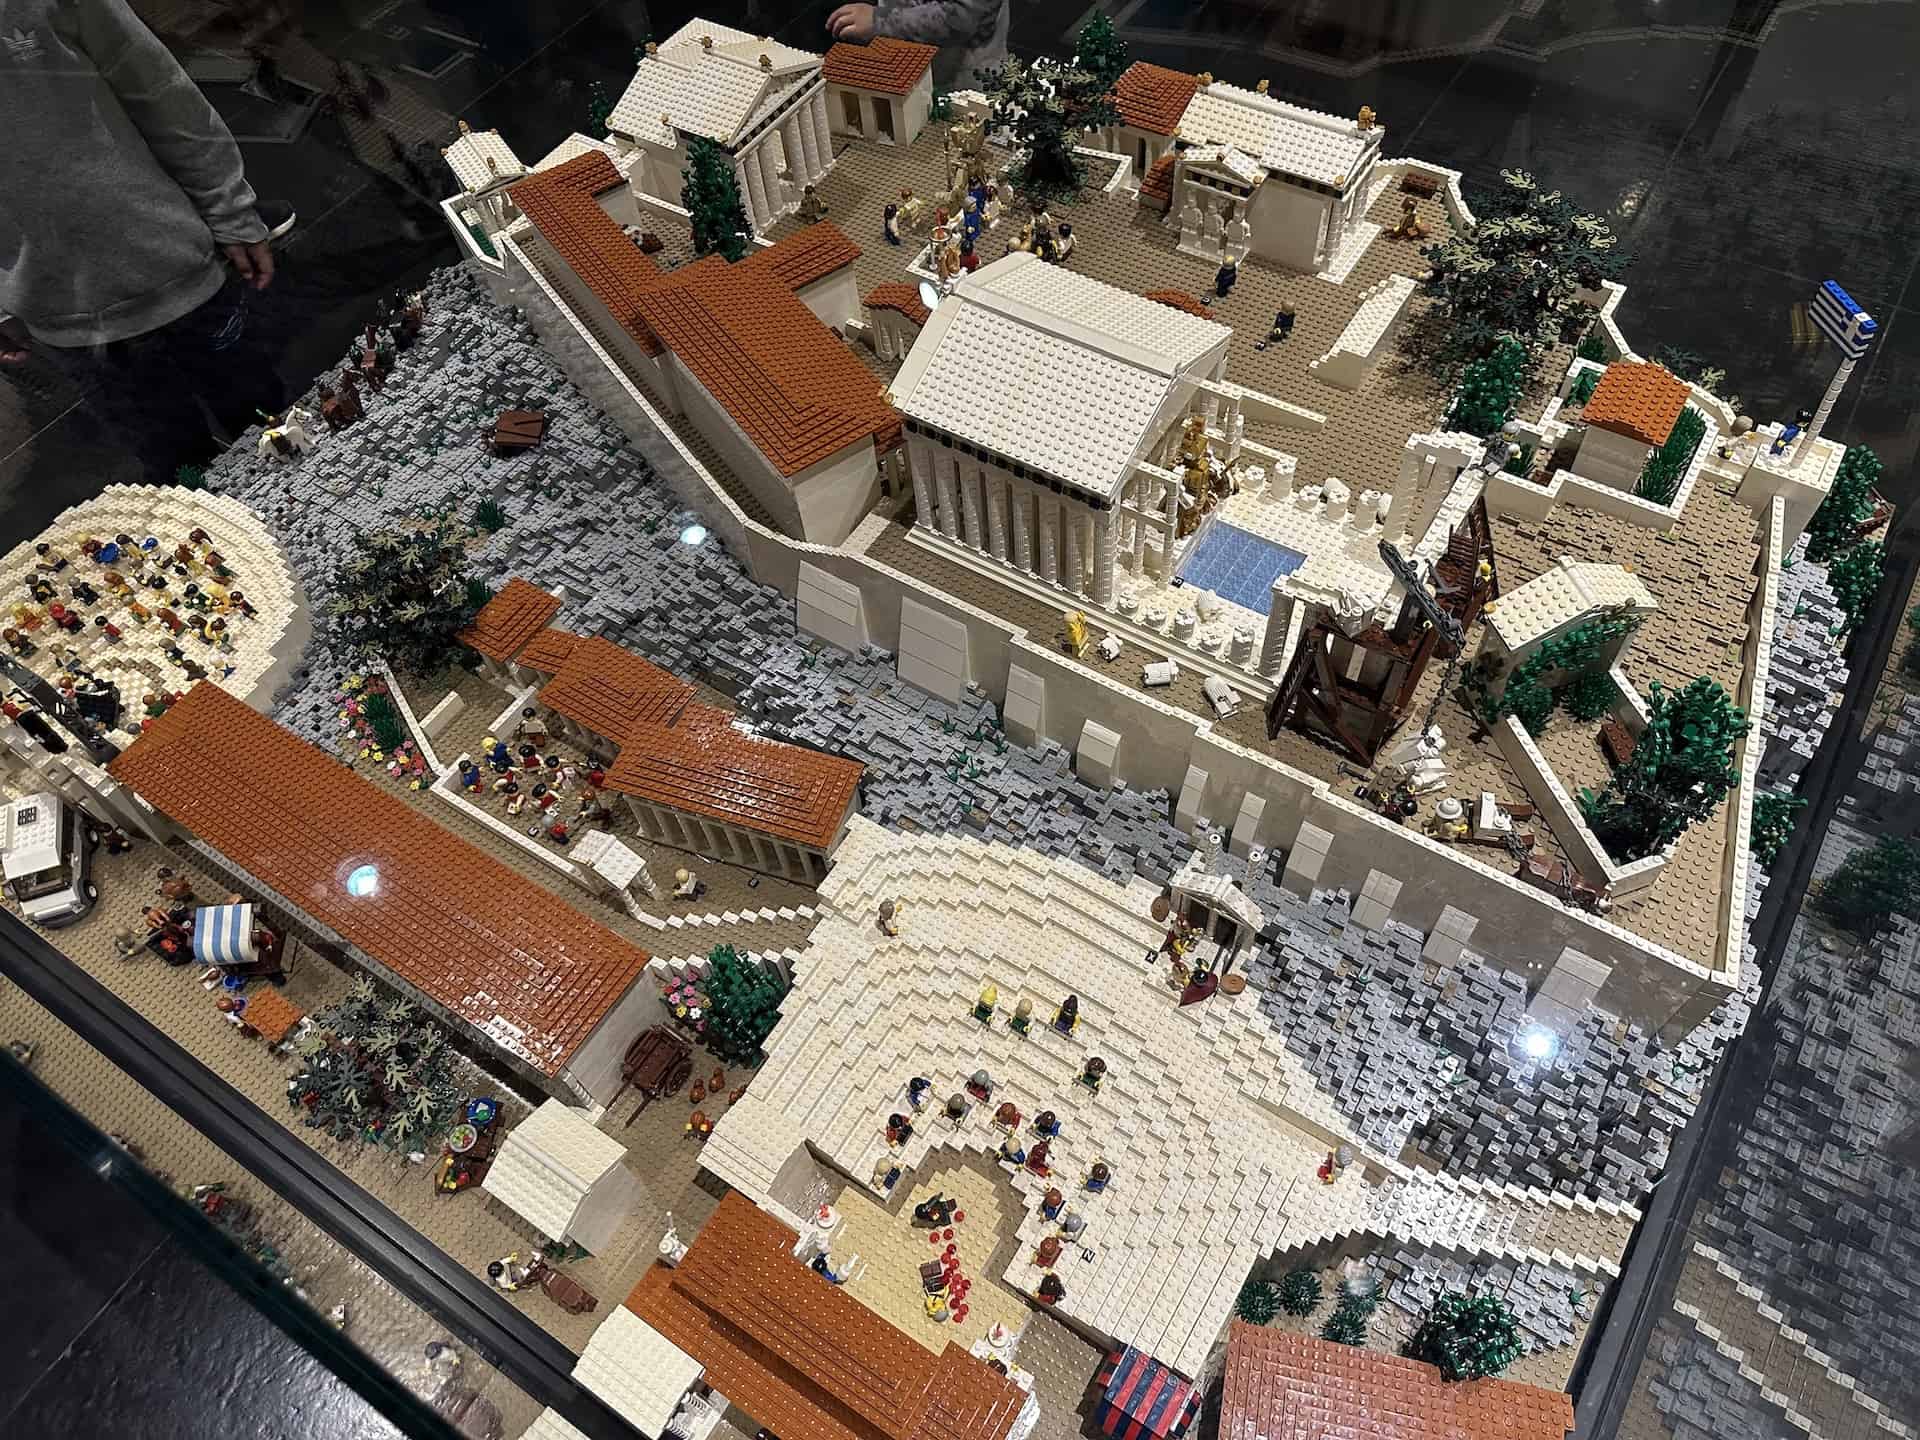 Lego Acropolis at the Kid's Corner at the Acropolis Museum in Athens, Greece